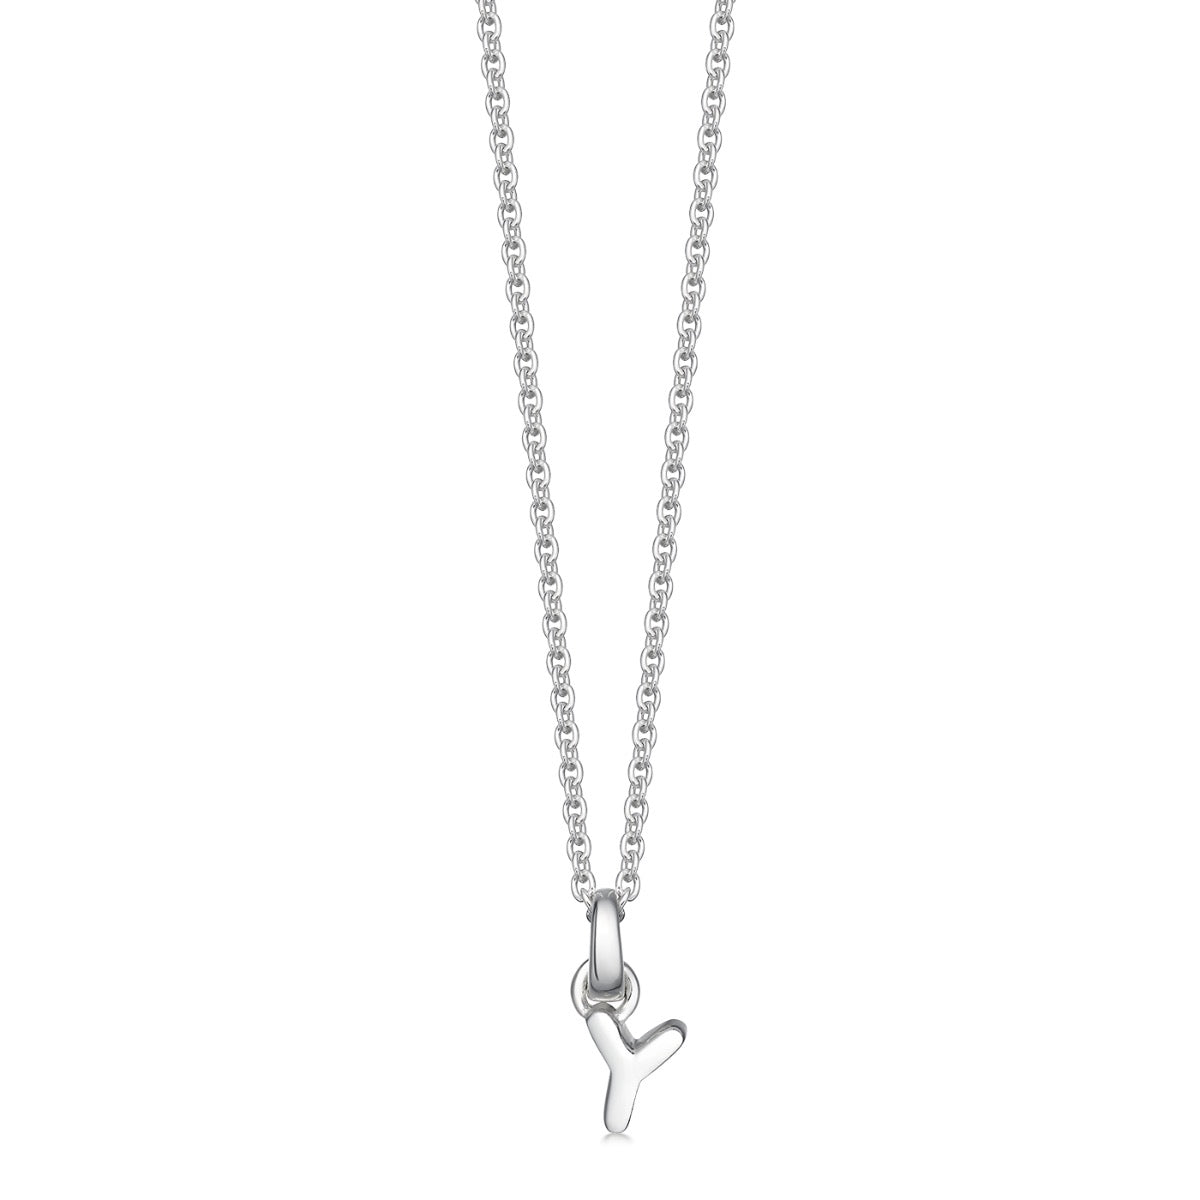 Mini Silver Letter "Y" Initial Necklace